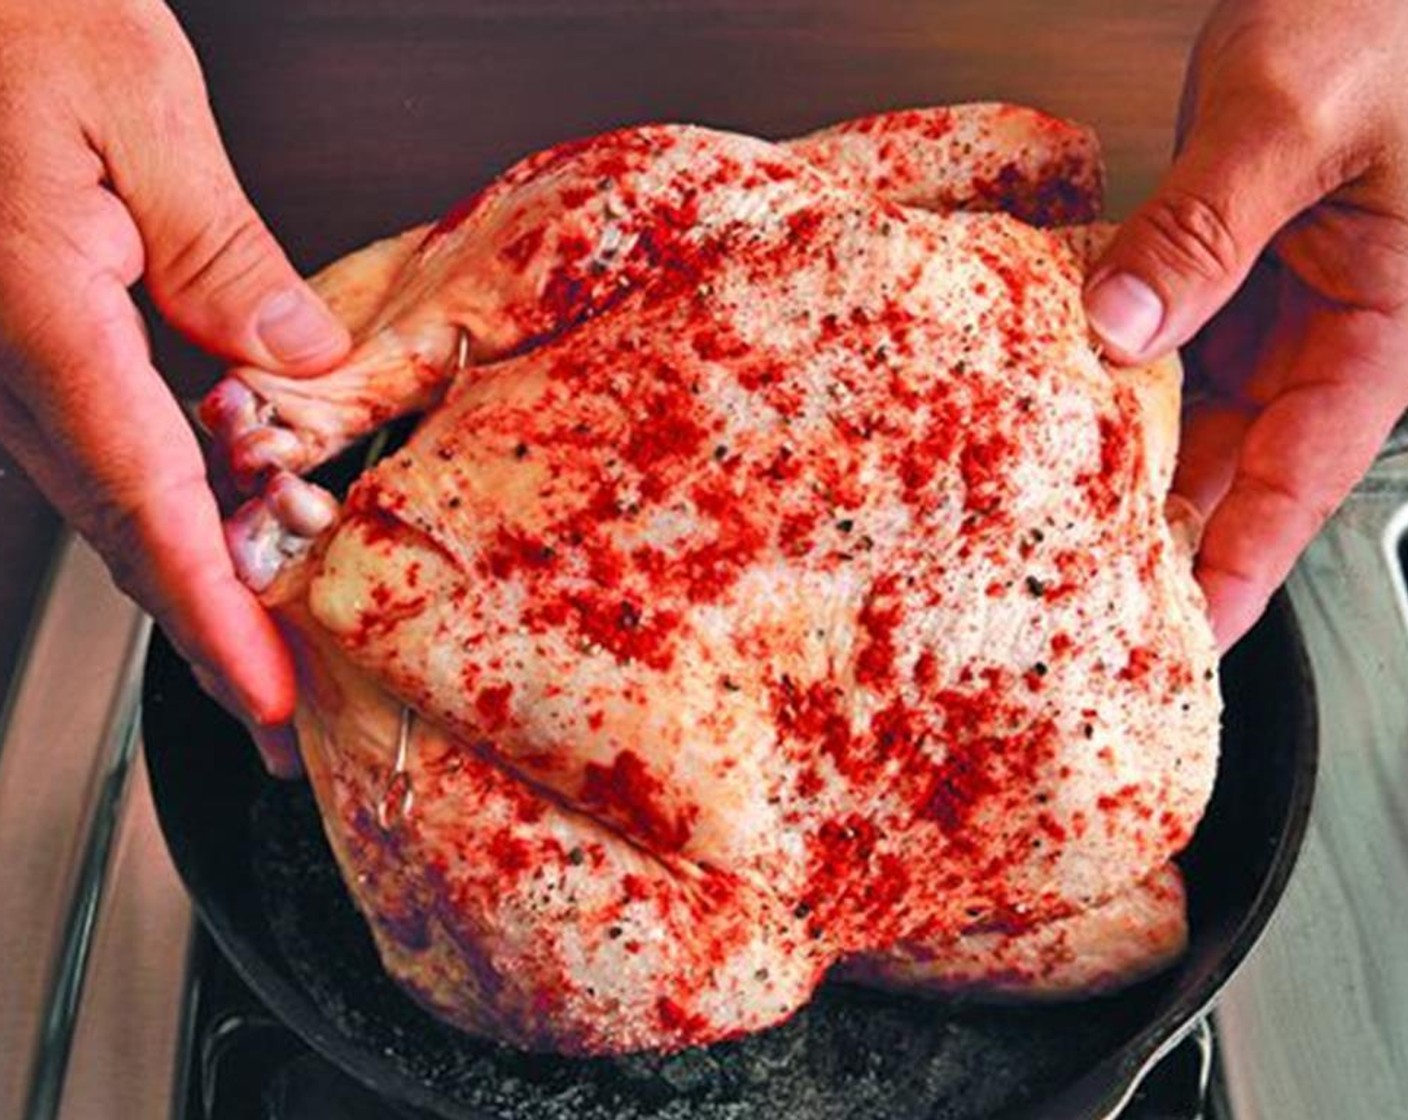 step 5 Rub the chicken all over with Butter (2 Tbsp) then sprinkle it with the Smoked Paprika (1/2 tsp), salt and pepper to taste.